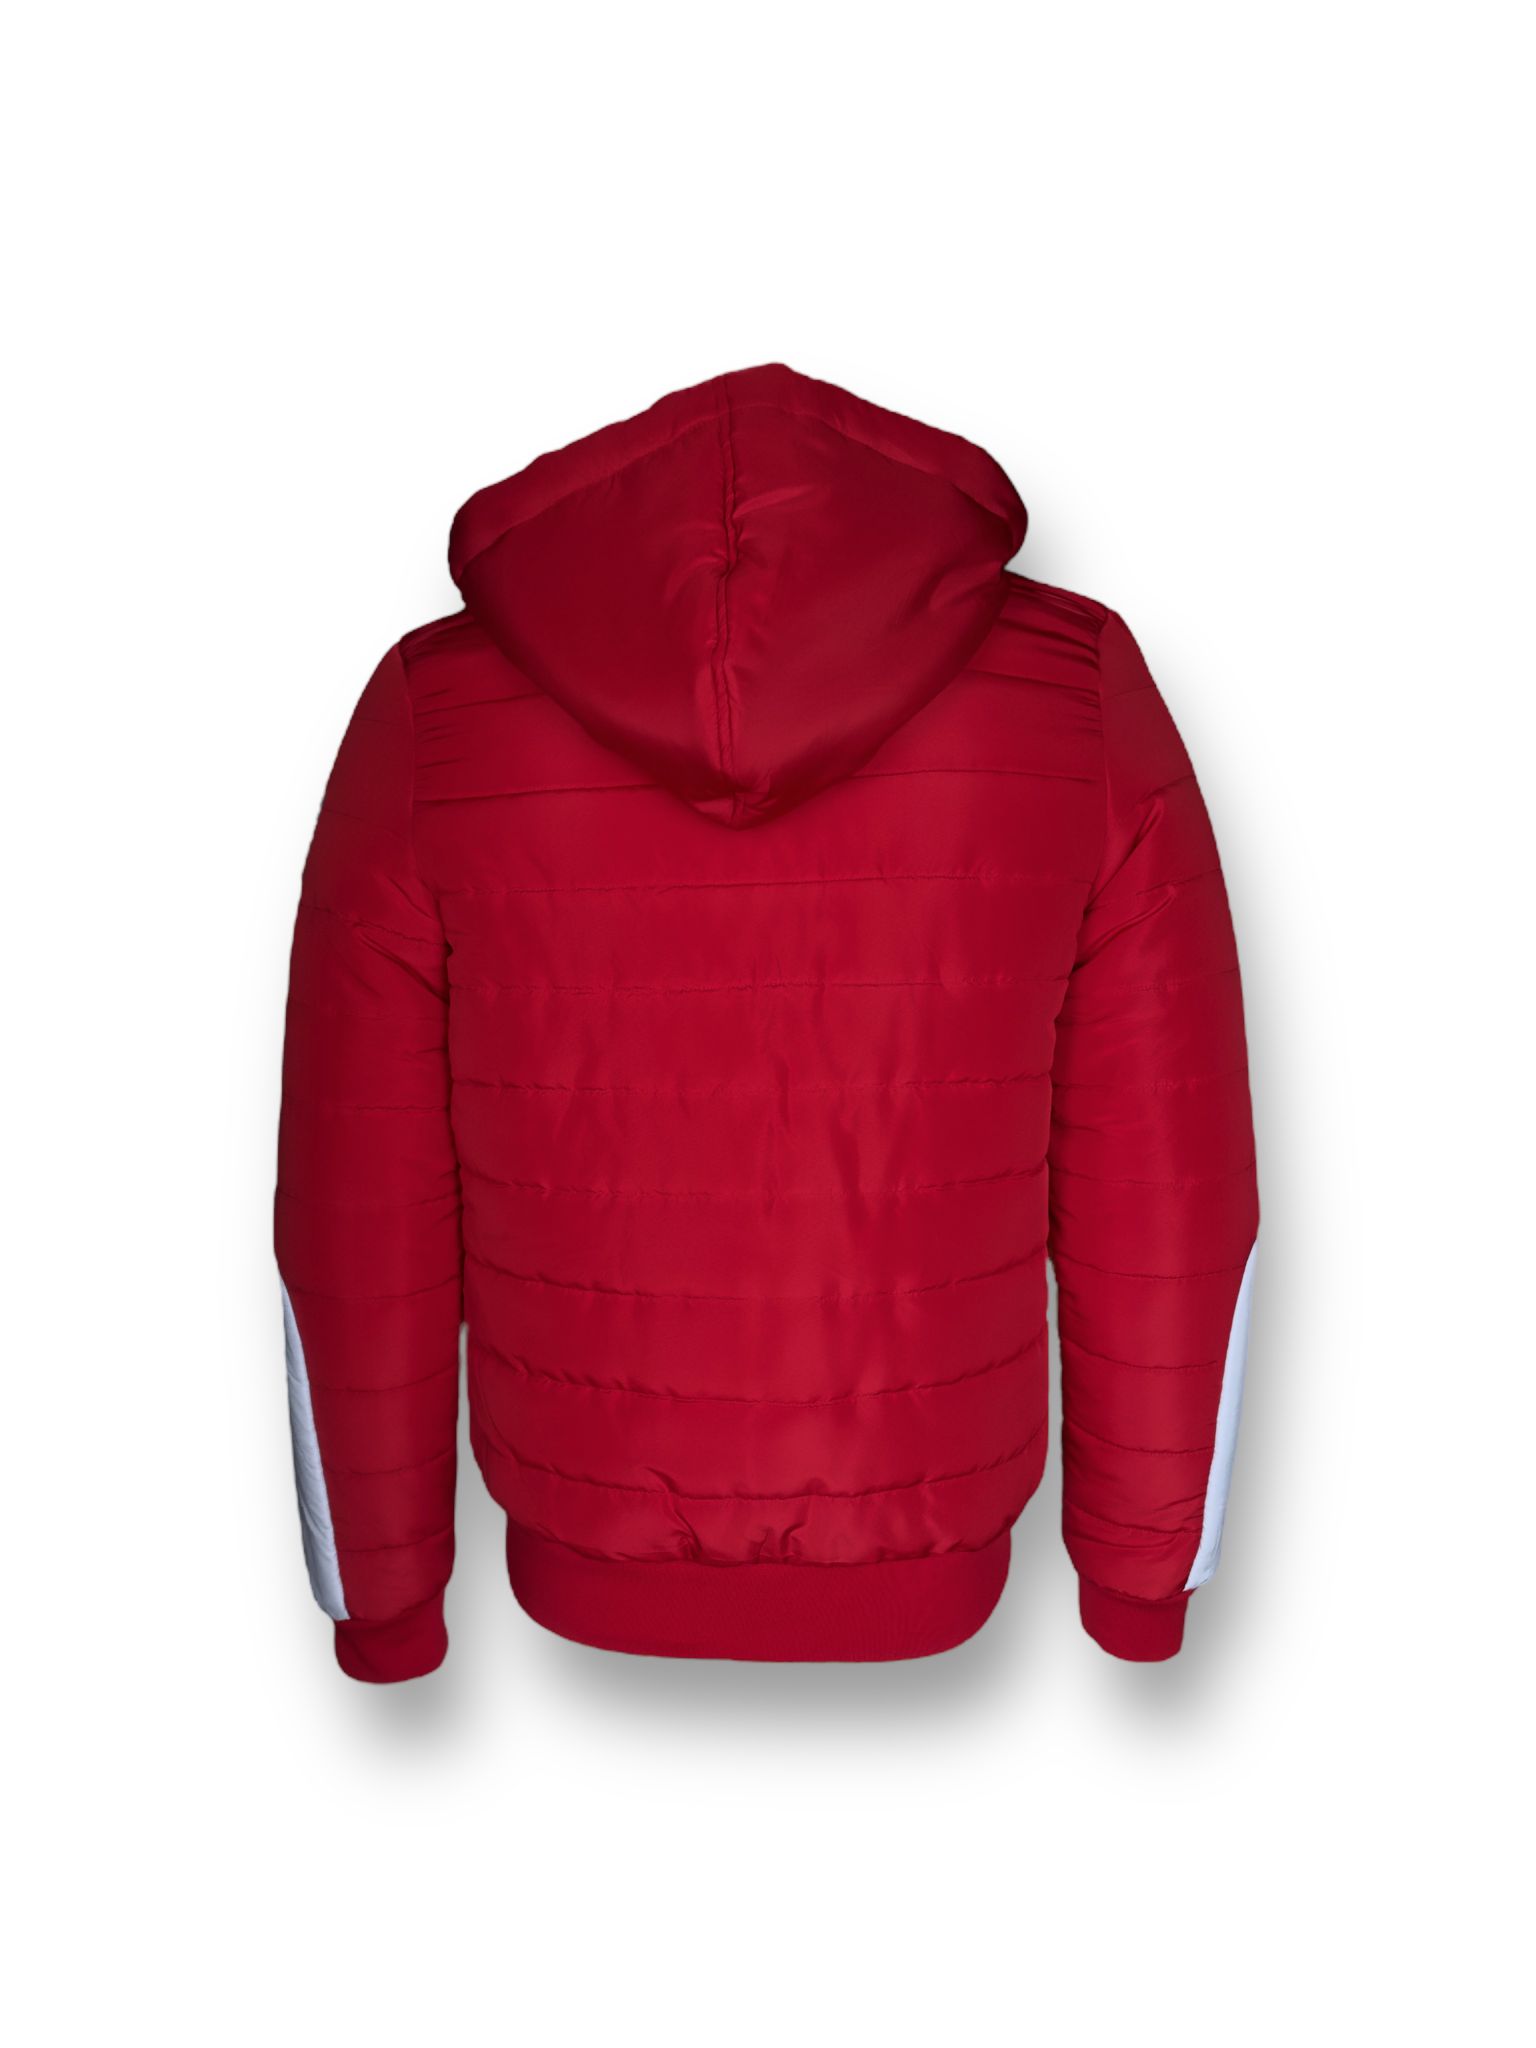 MS100-437 RED WIND JACKET WITH CORD